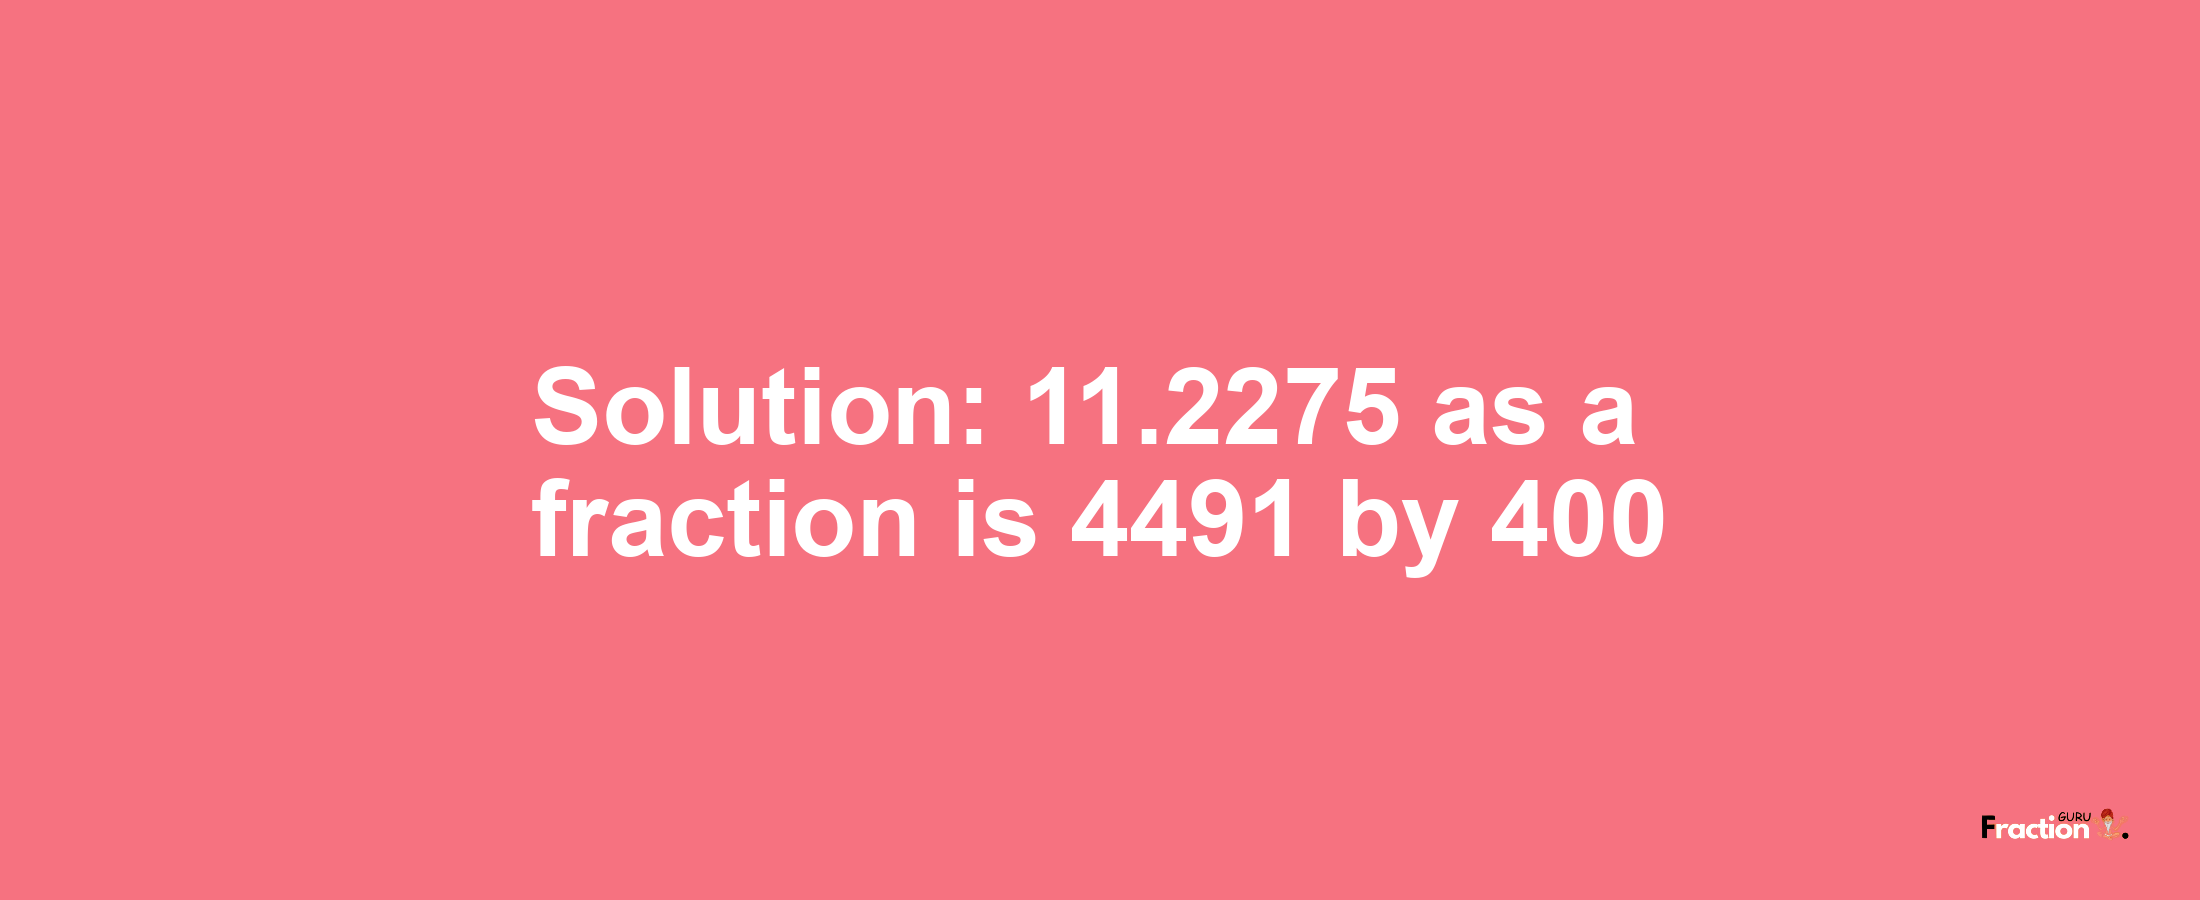 Solution:11.2275 as a fraction is 4491/400